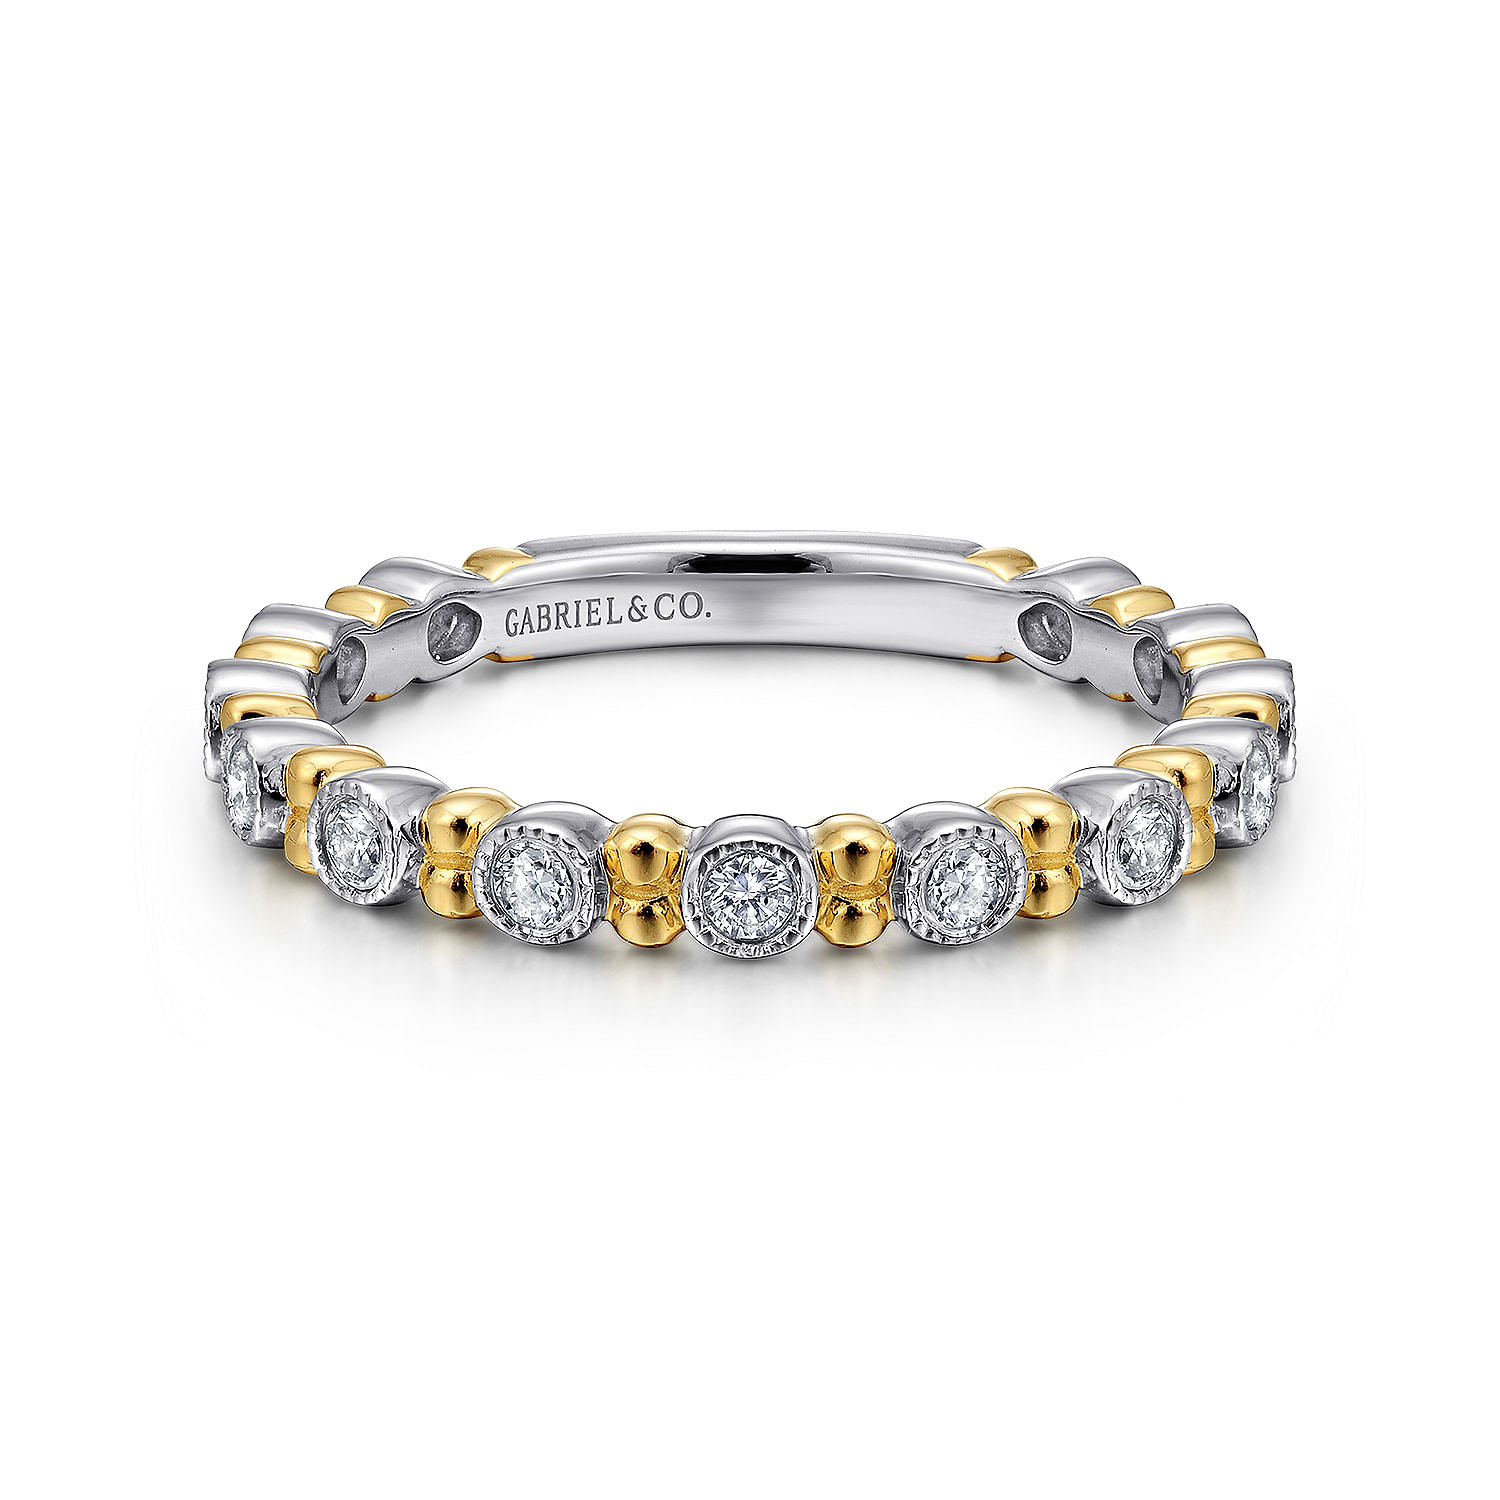 14K-White-Gold-Stackable-Diamond-Ring-with-Yellow-Gold-Bead-Spacers1